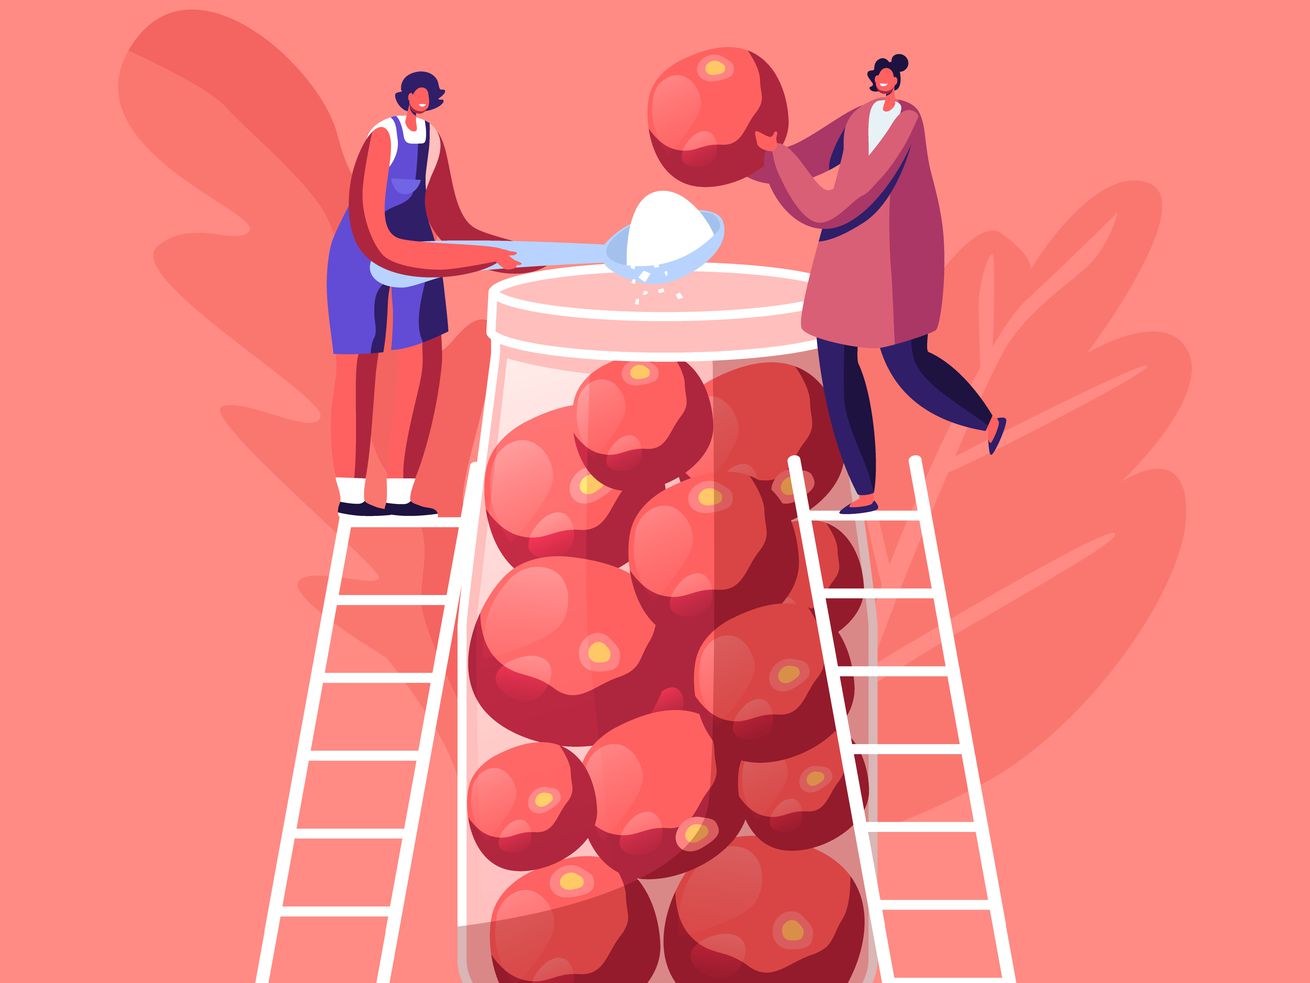 illustration of two tiny people standing on ladders putting tomatoes and salt into a huge glass jar.